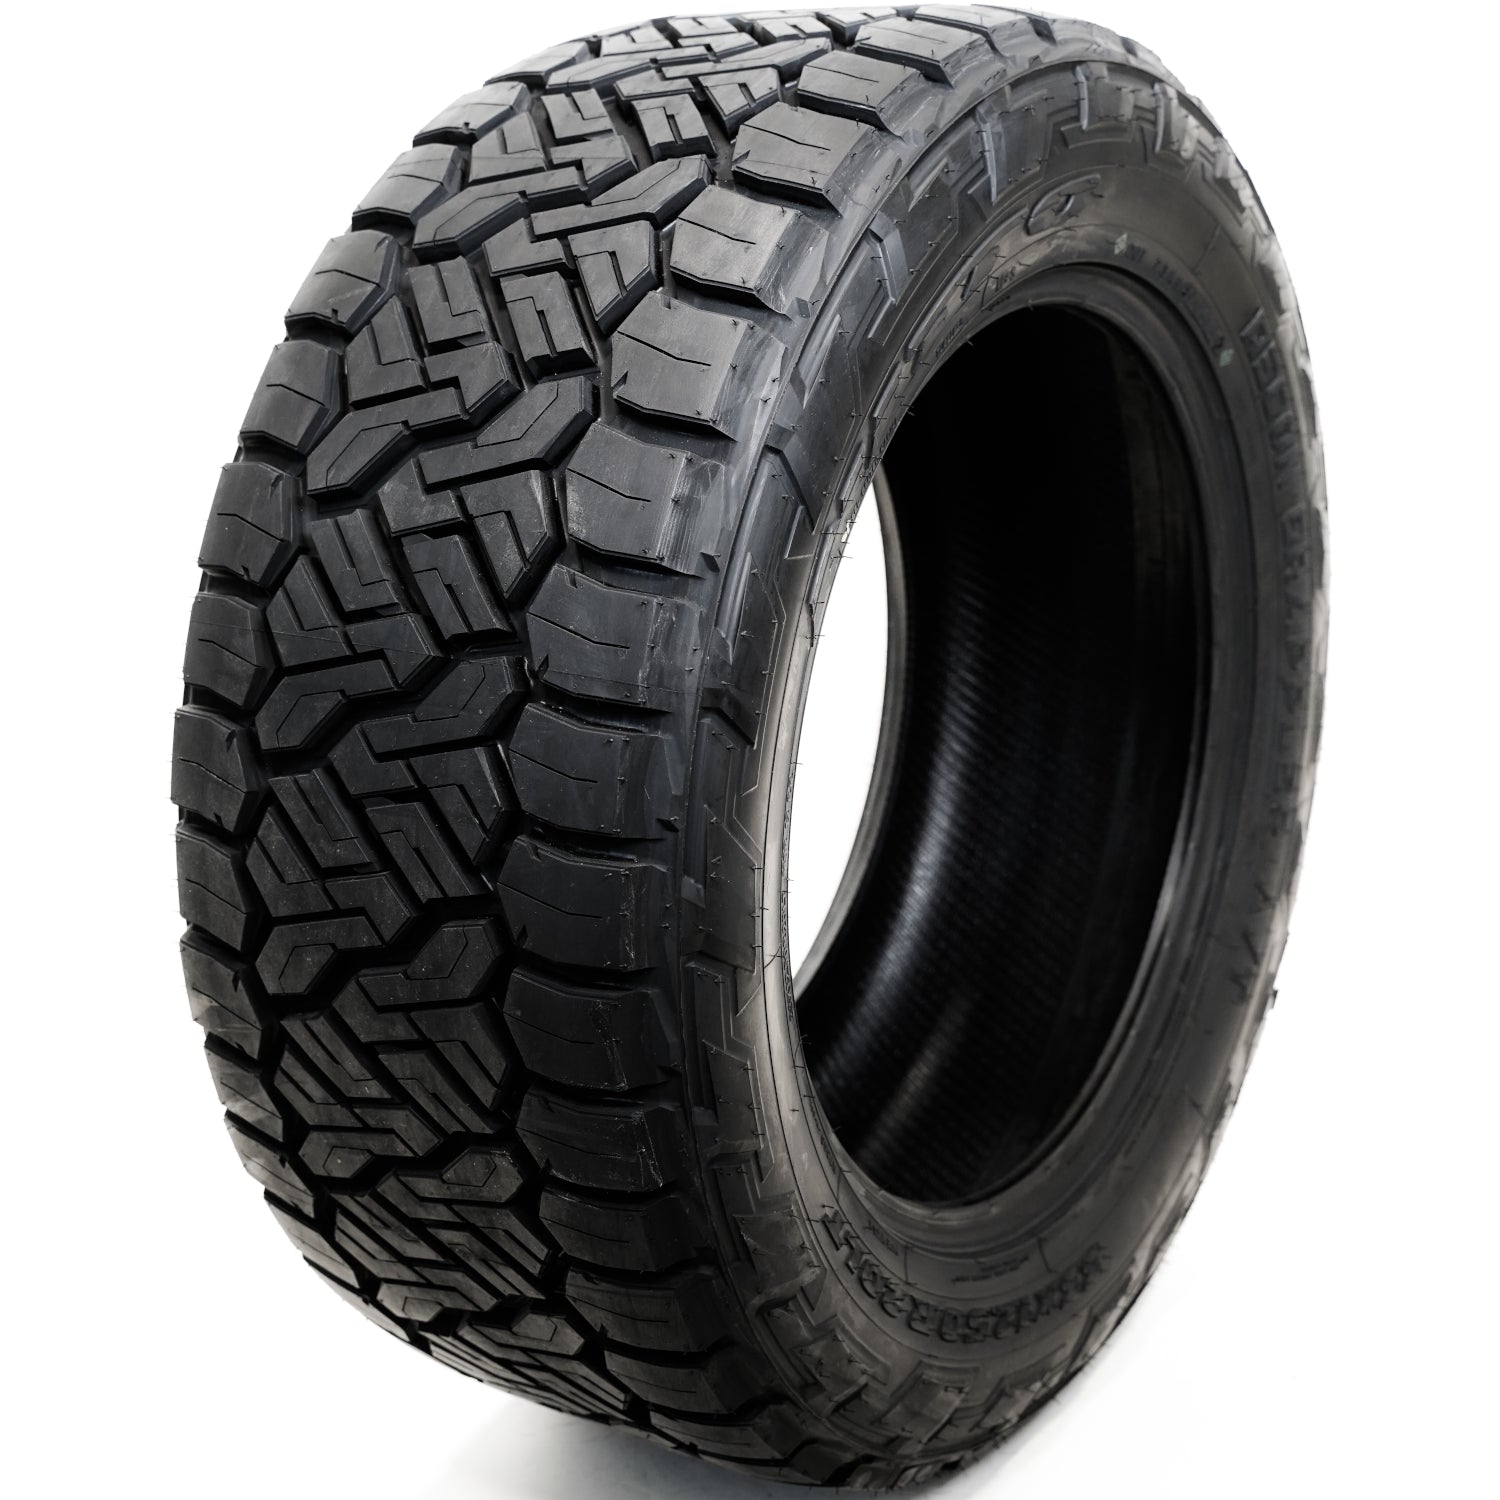 NITTO RECON GRAPPLER A/T LT33X11.50R17 Tires